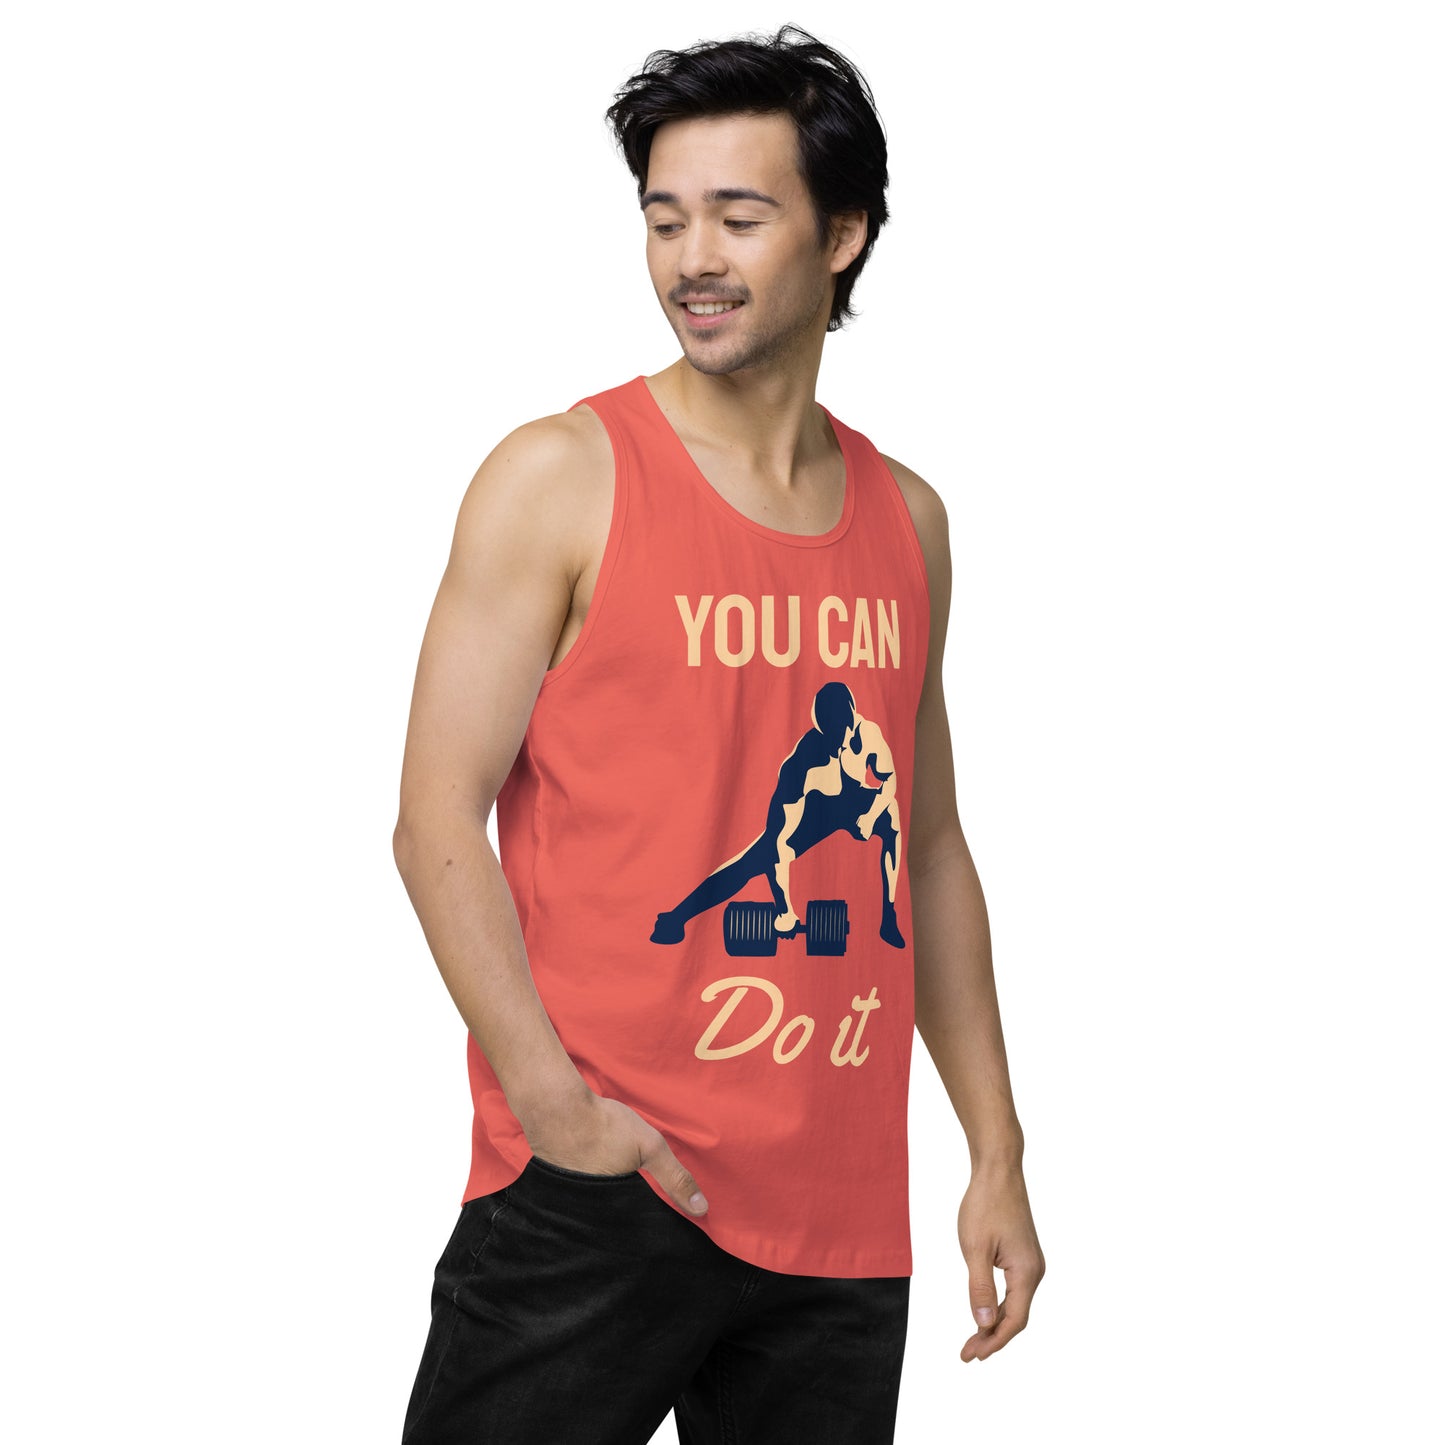 You can do it premium tank top - Sport Finesse